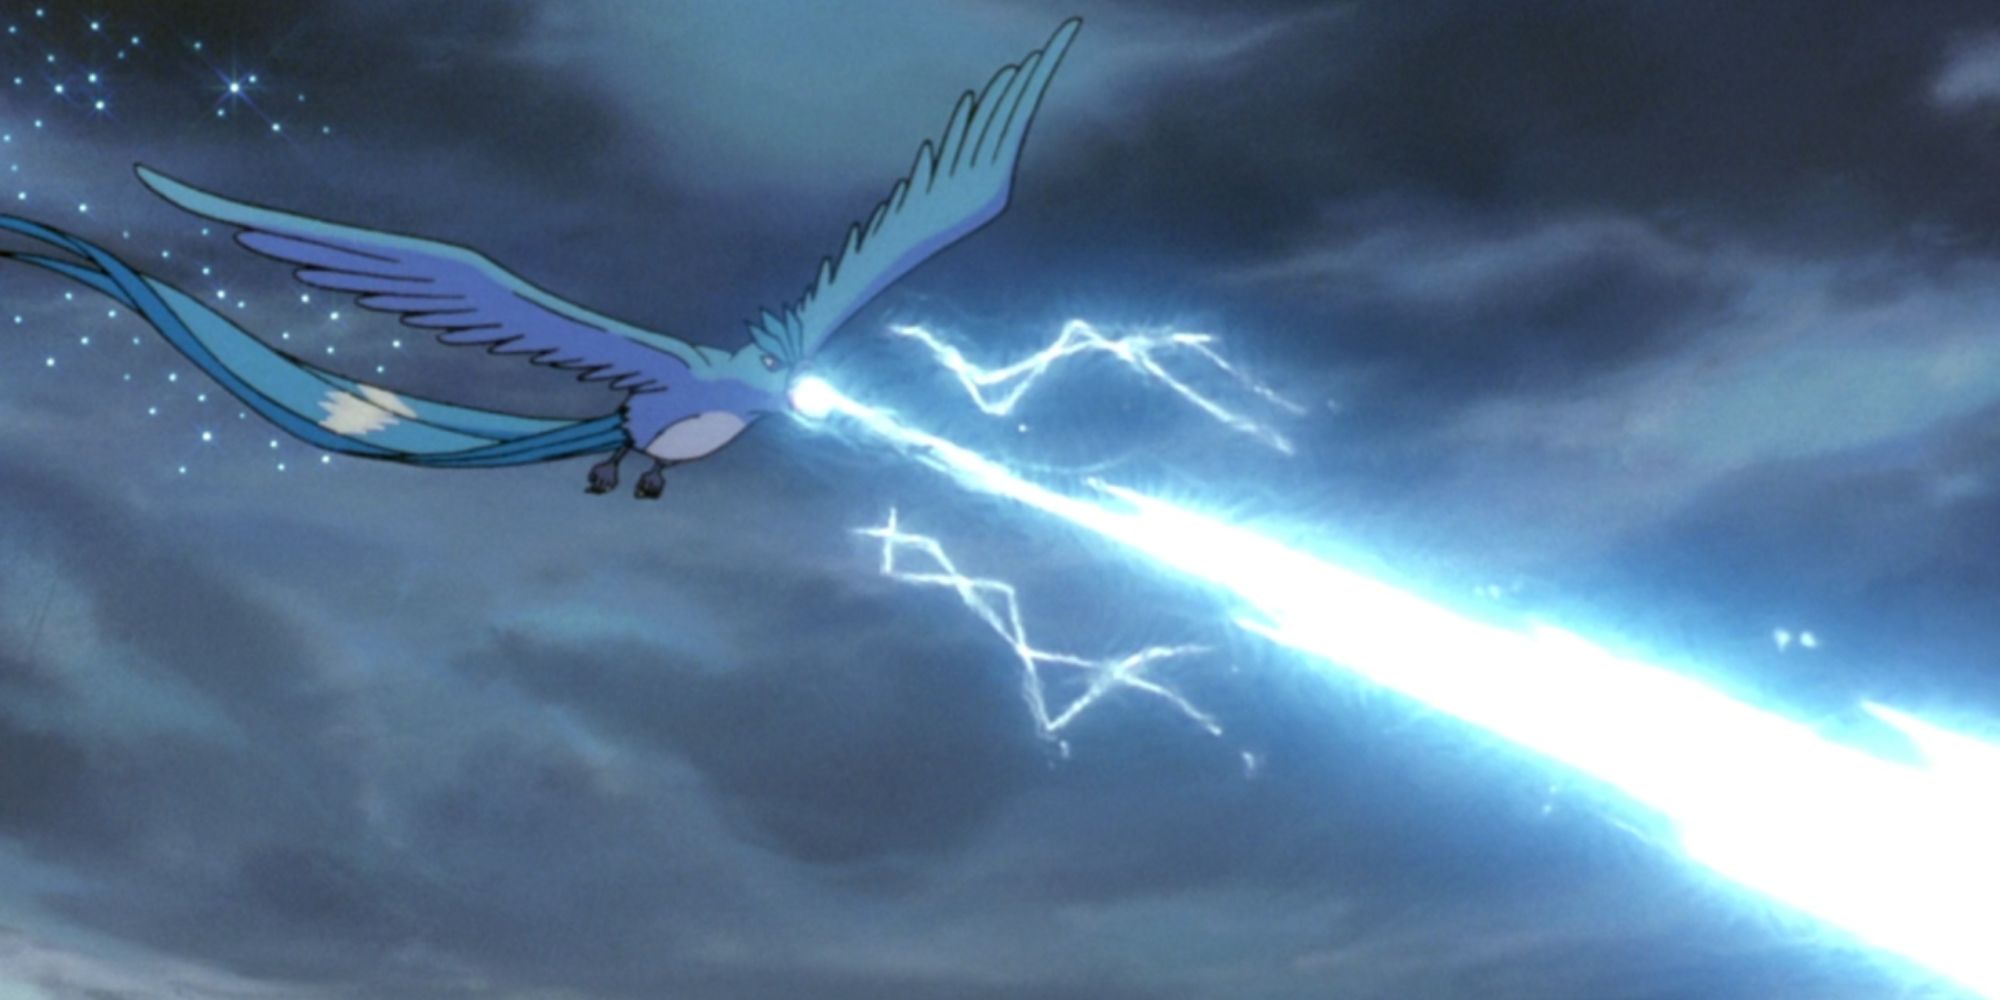 Articuno uses Ice Beam while it flies through the sky in the Pokemon 2000 movie.